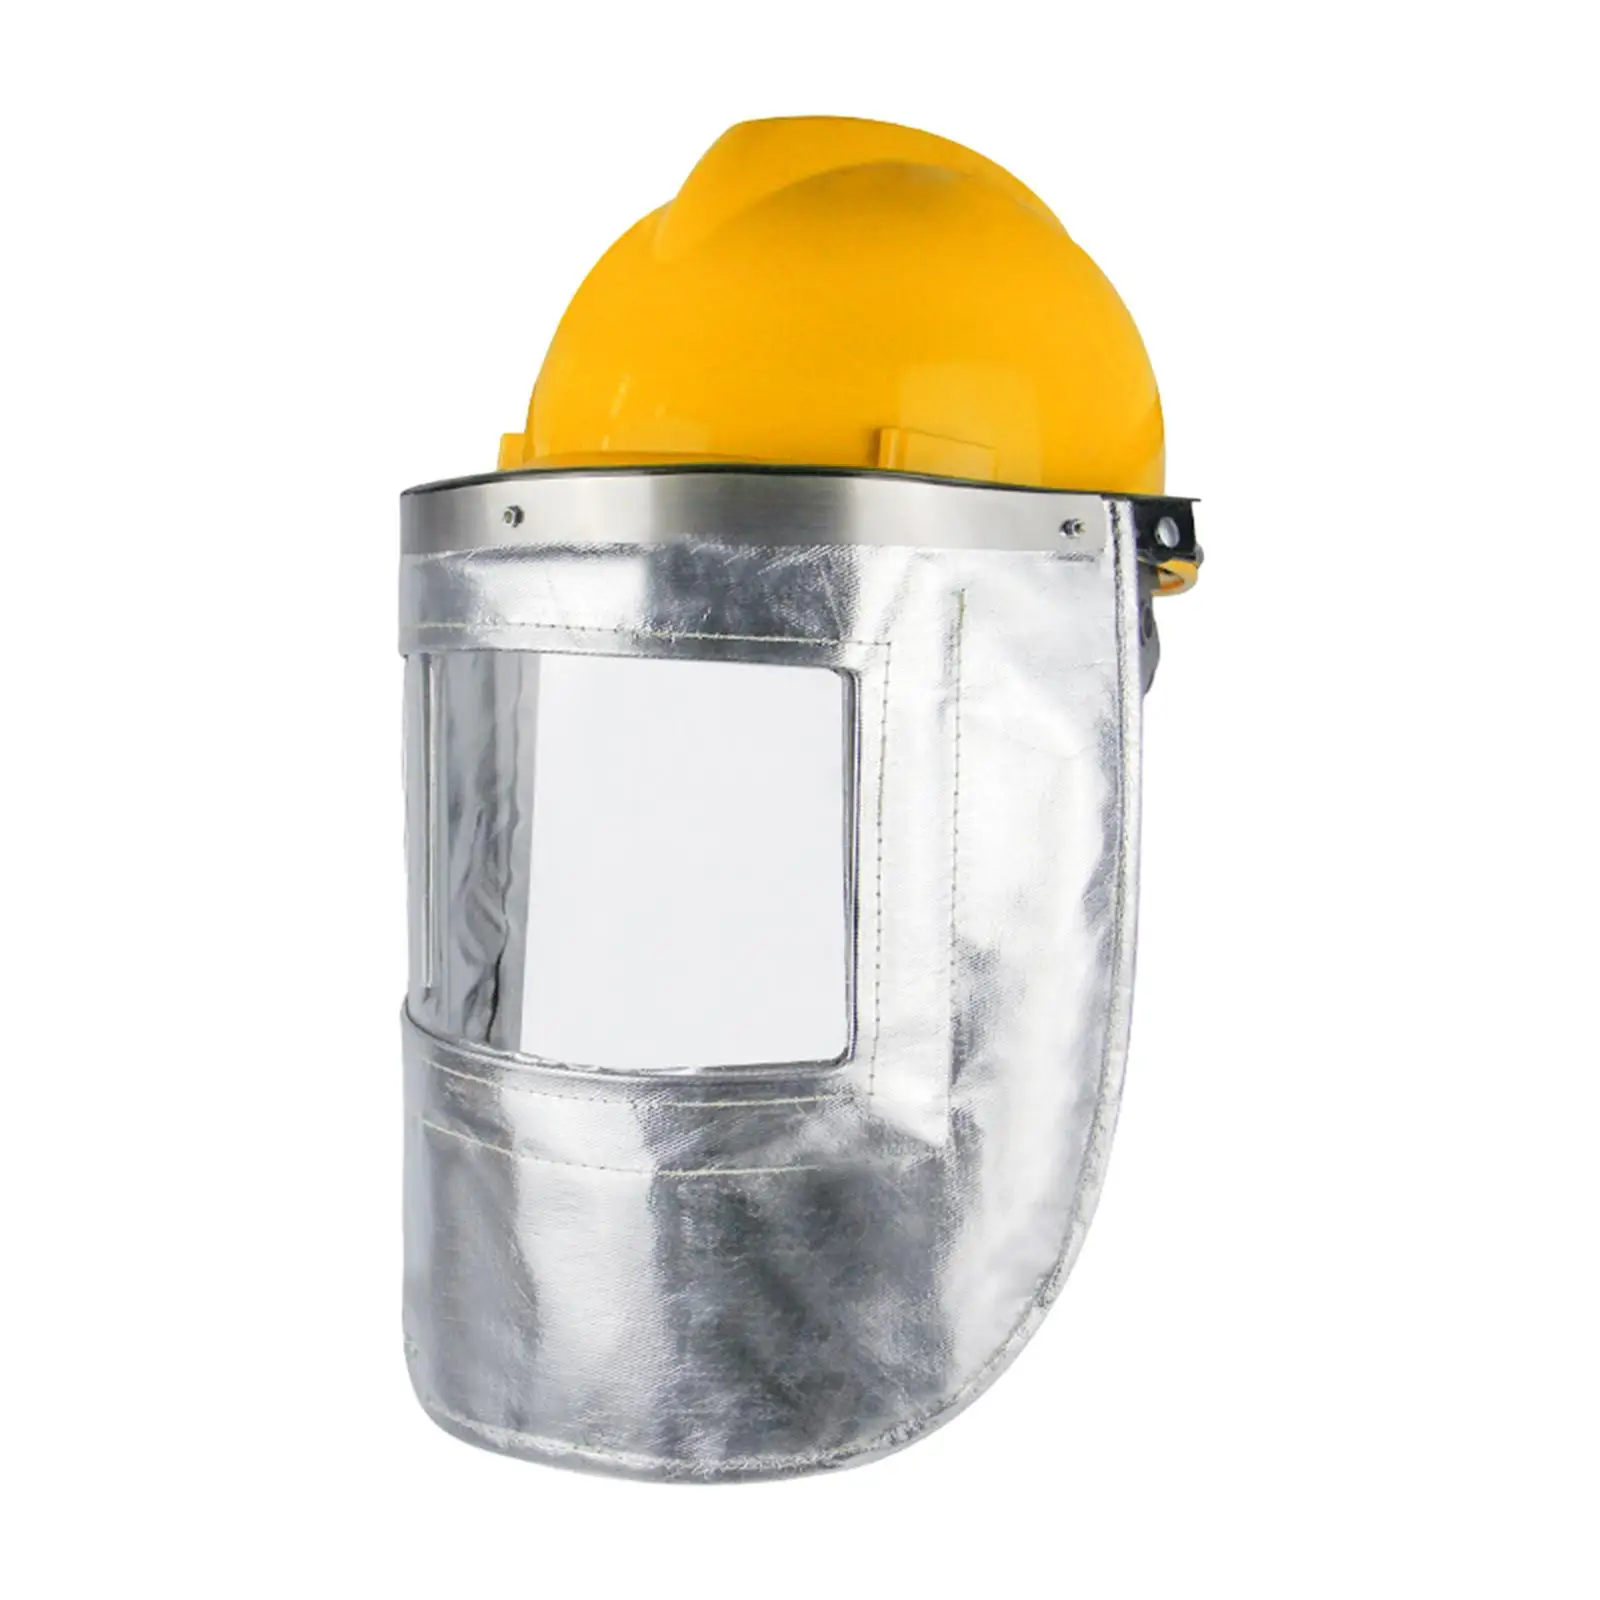 Welding Mask Hood Welder Face Cover High Temperature Protection for Grinding Mining Comfortable to Wear Accessories Professional